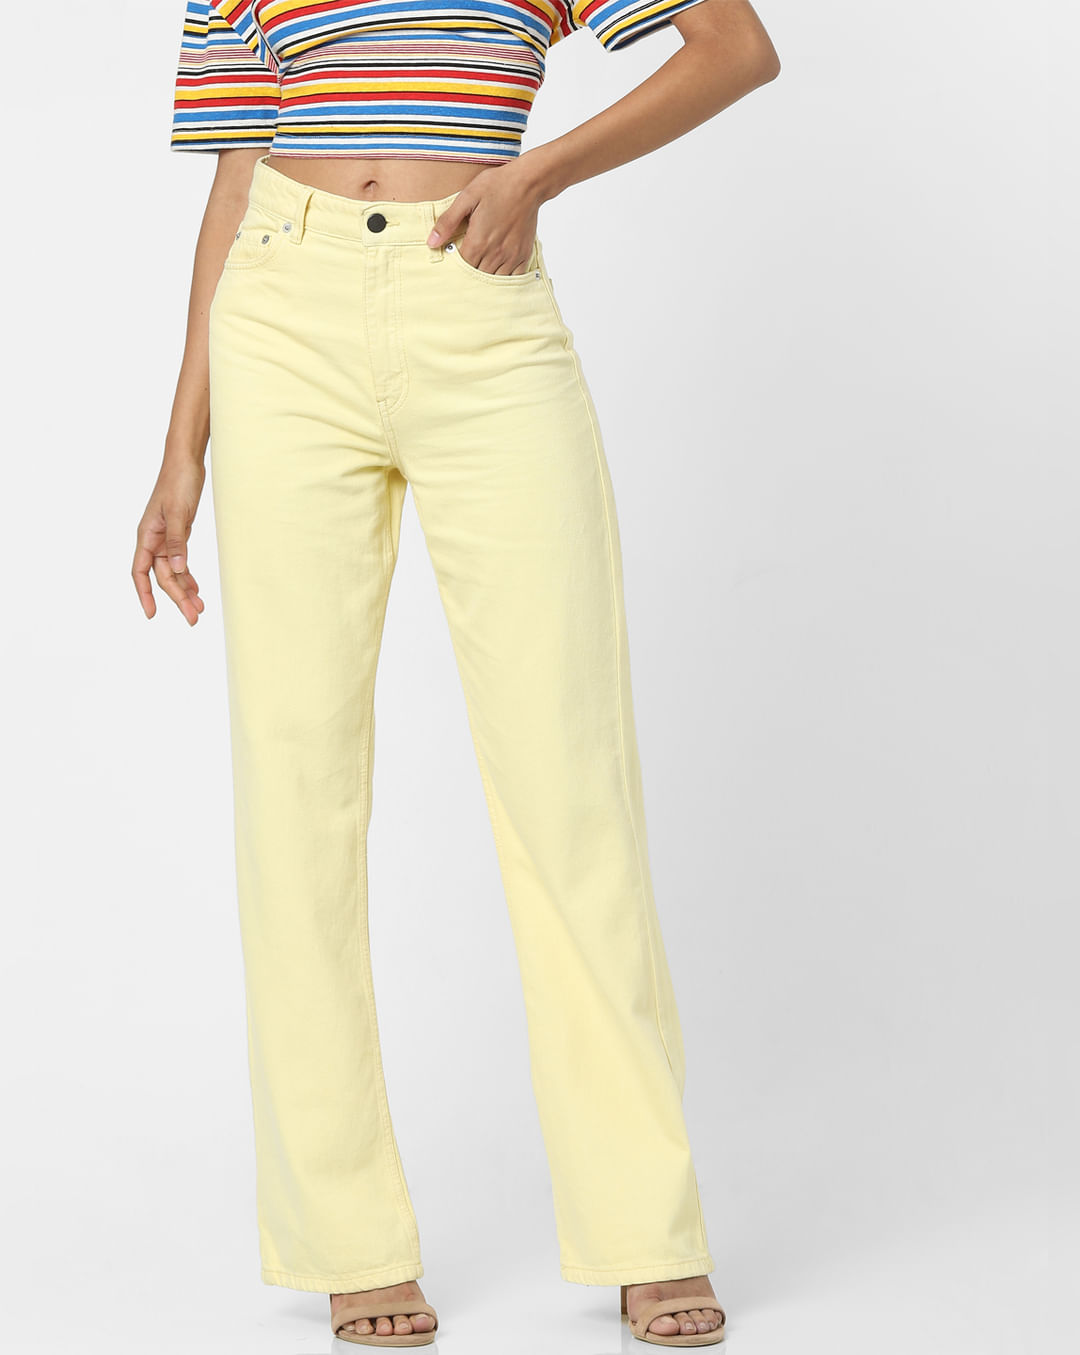 yellow Pants & Jeans For Women - Pleated, Joggers & Denim Jeans